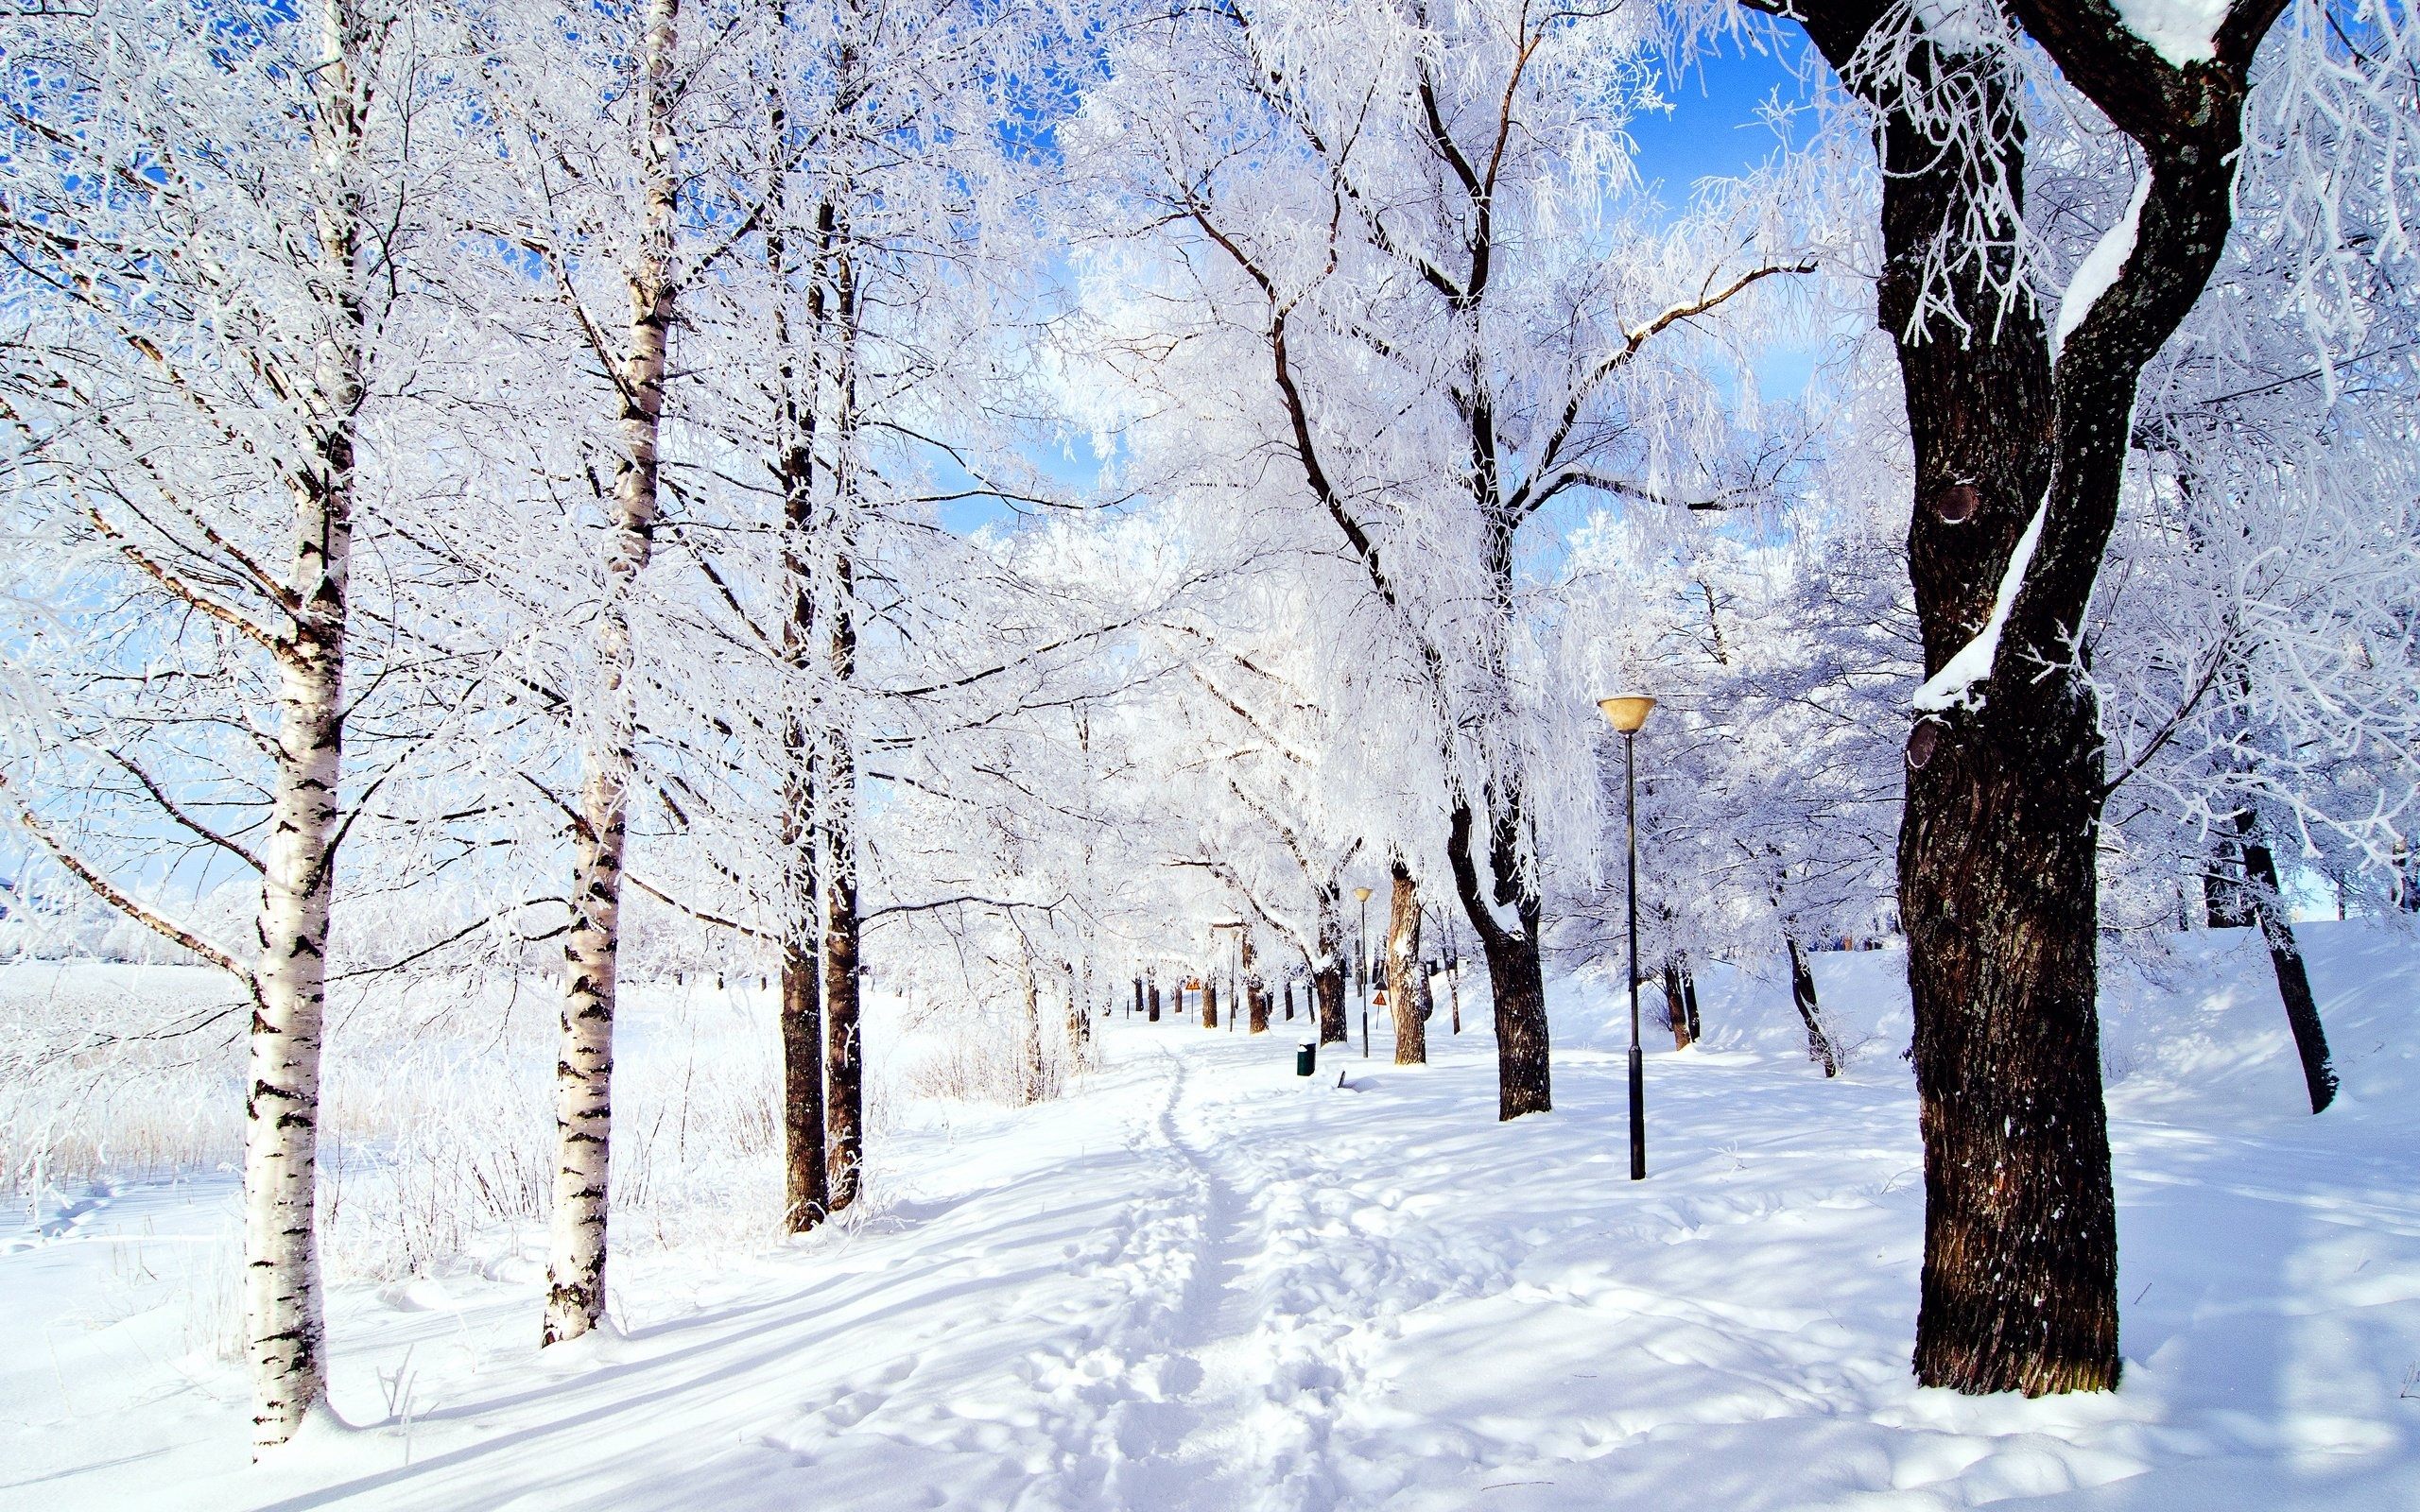 great tree way, snow powerpoint image hd download